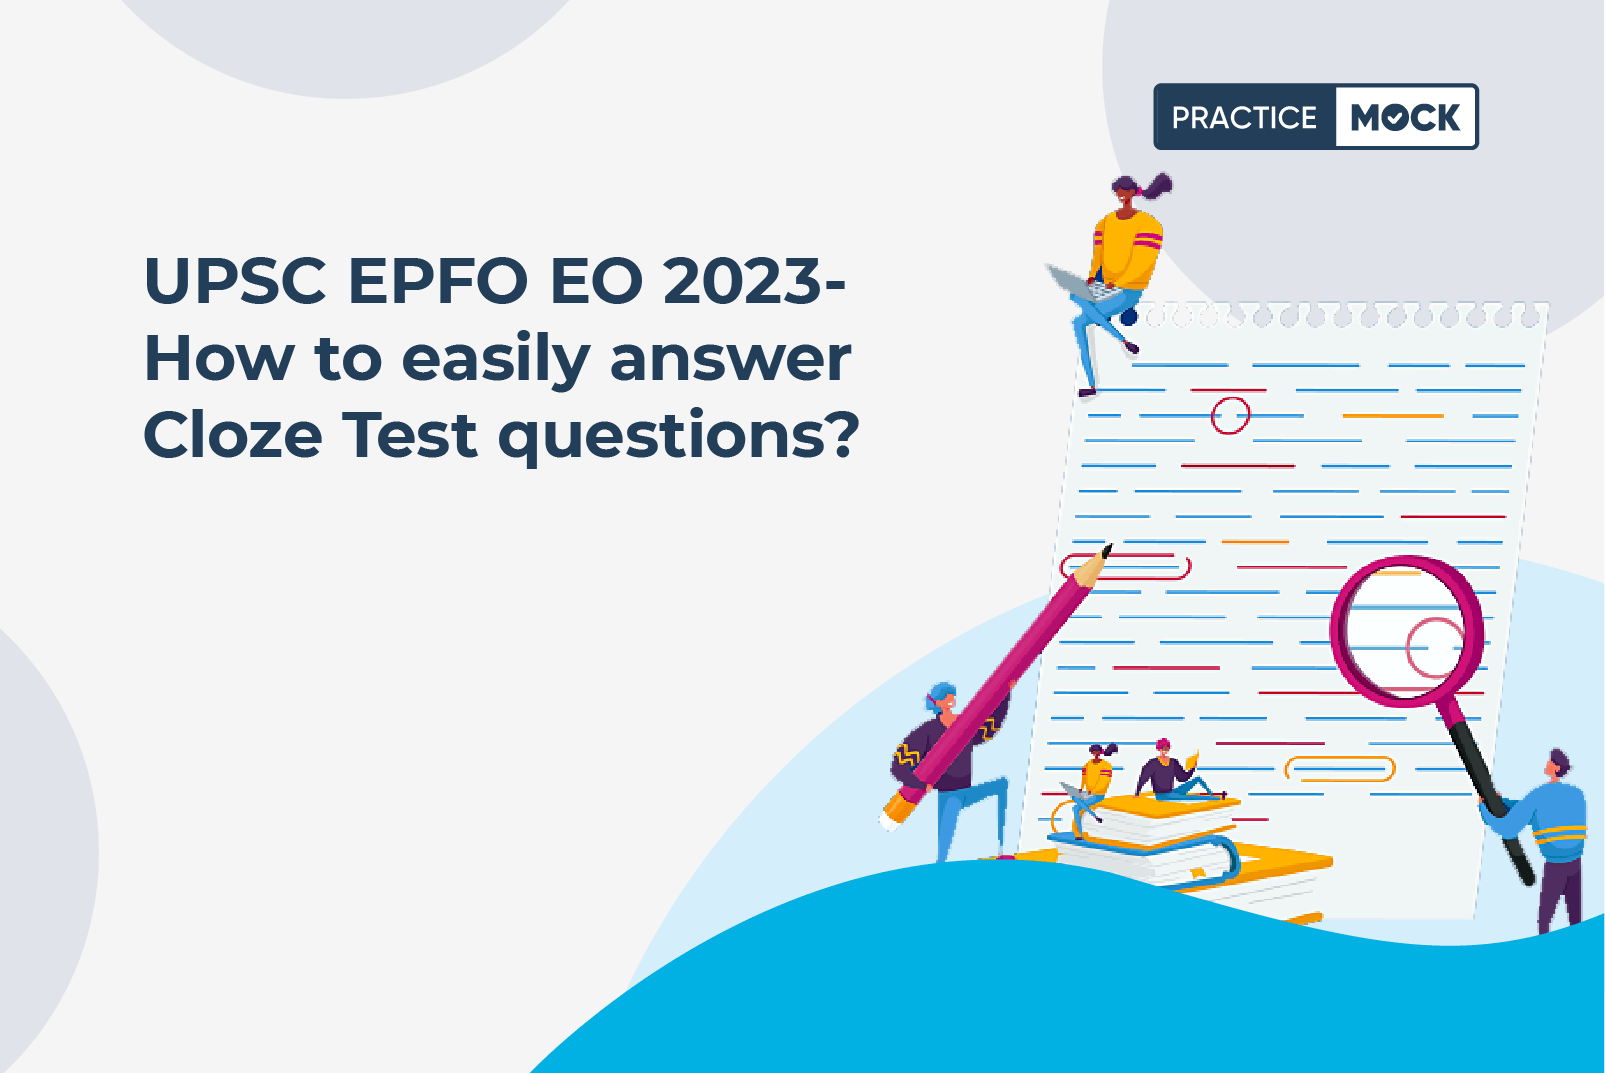 UPSC EPFO EO 2023-The Art of Answering Cloze Tests Questions